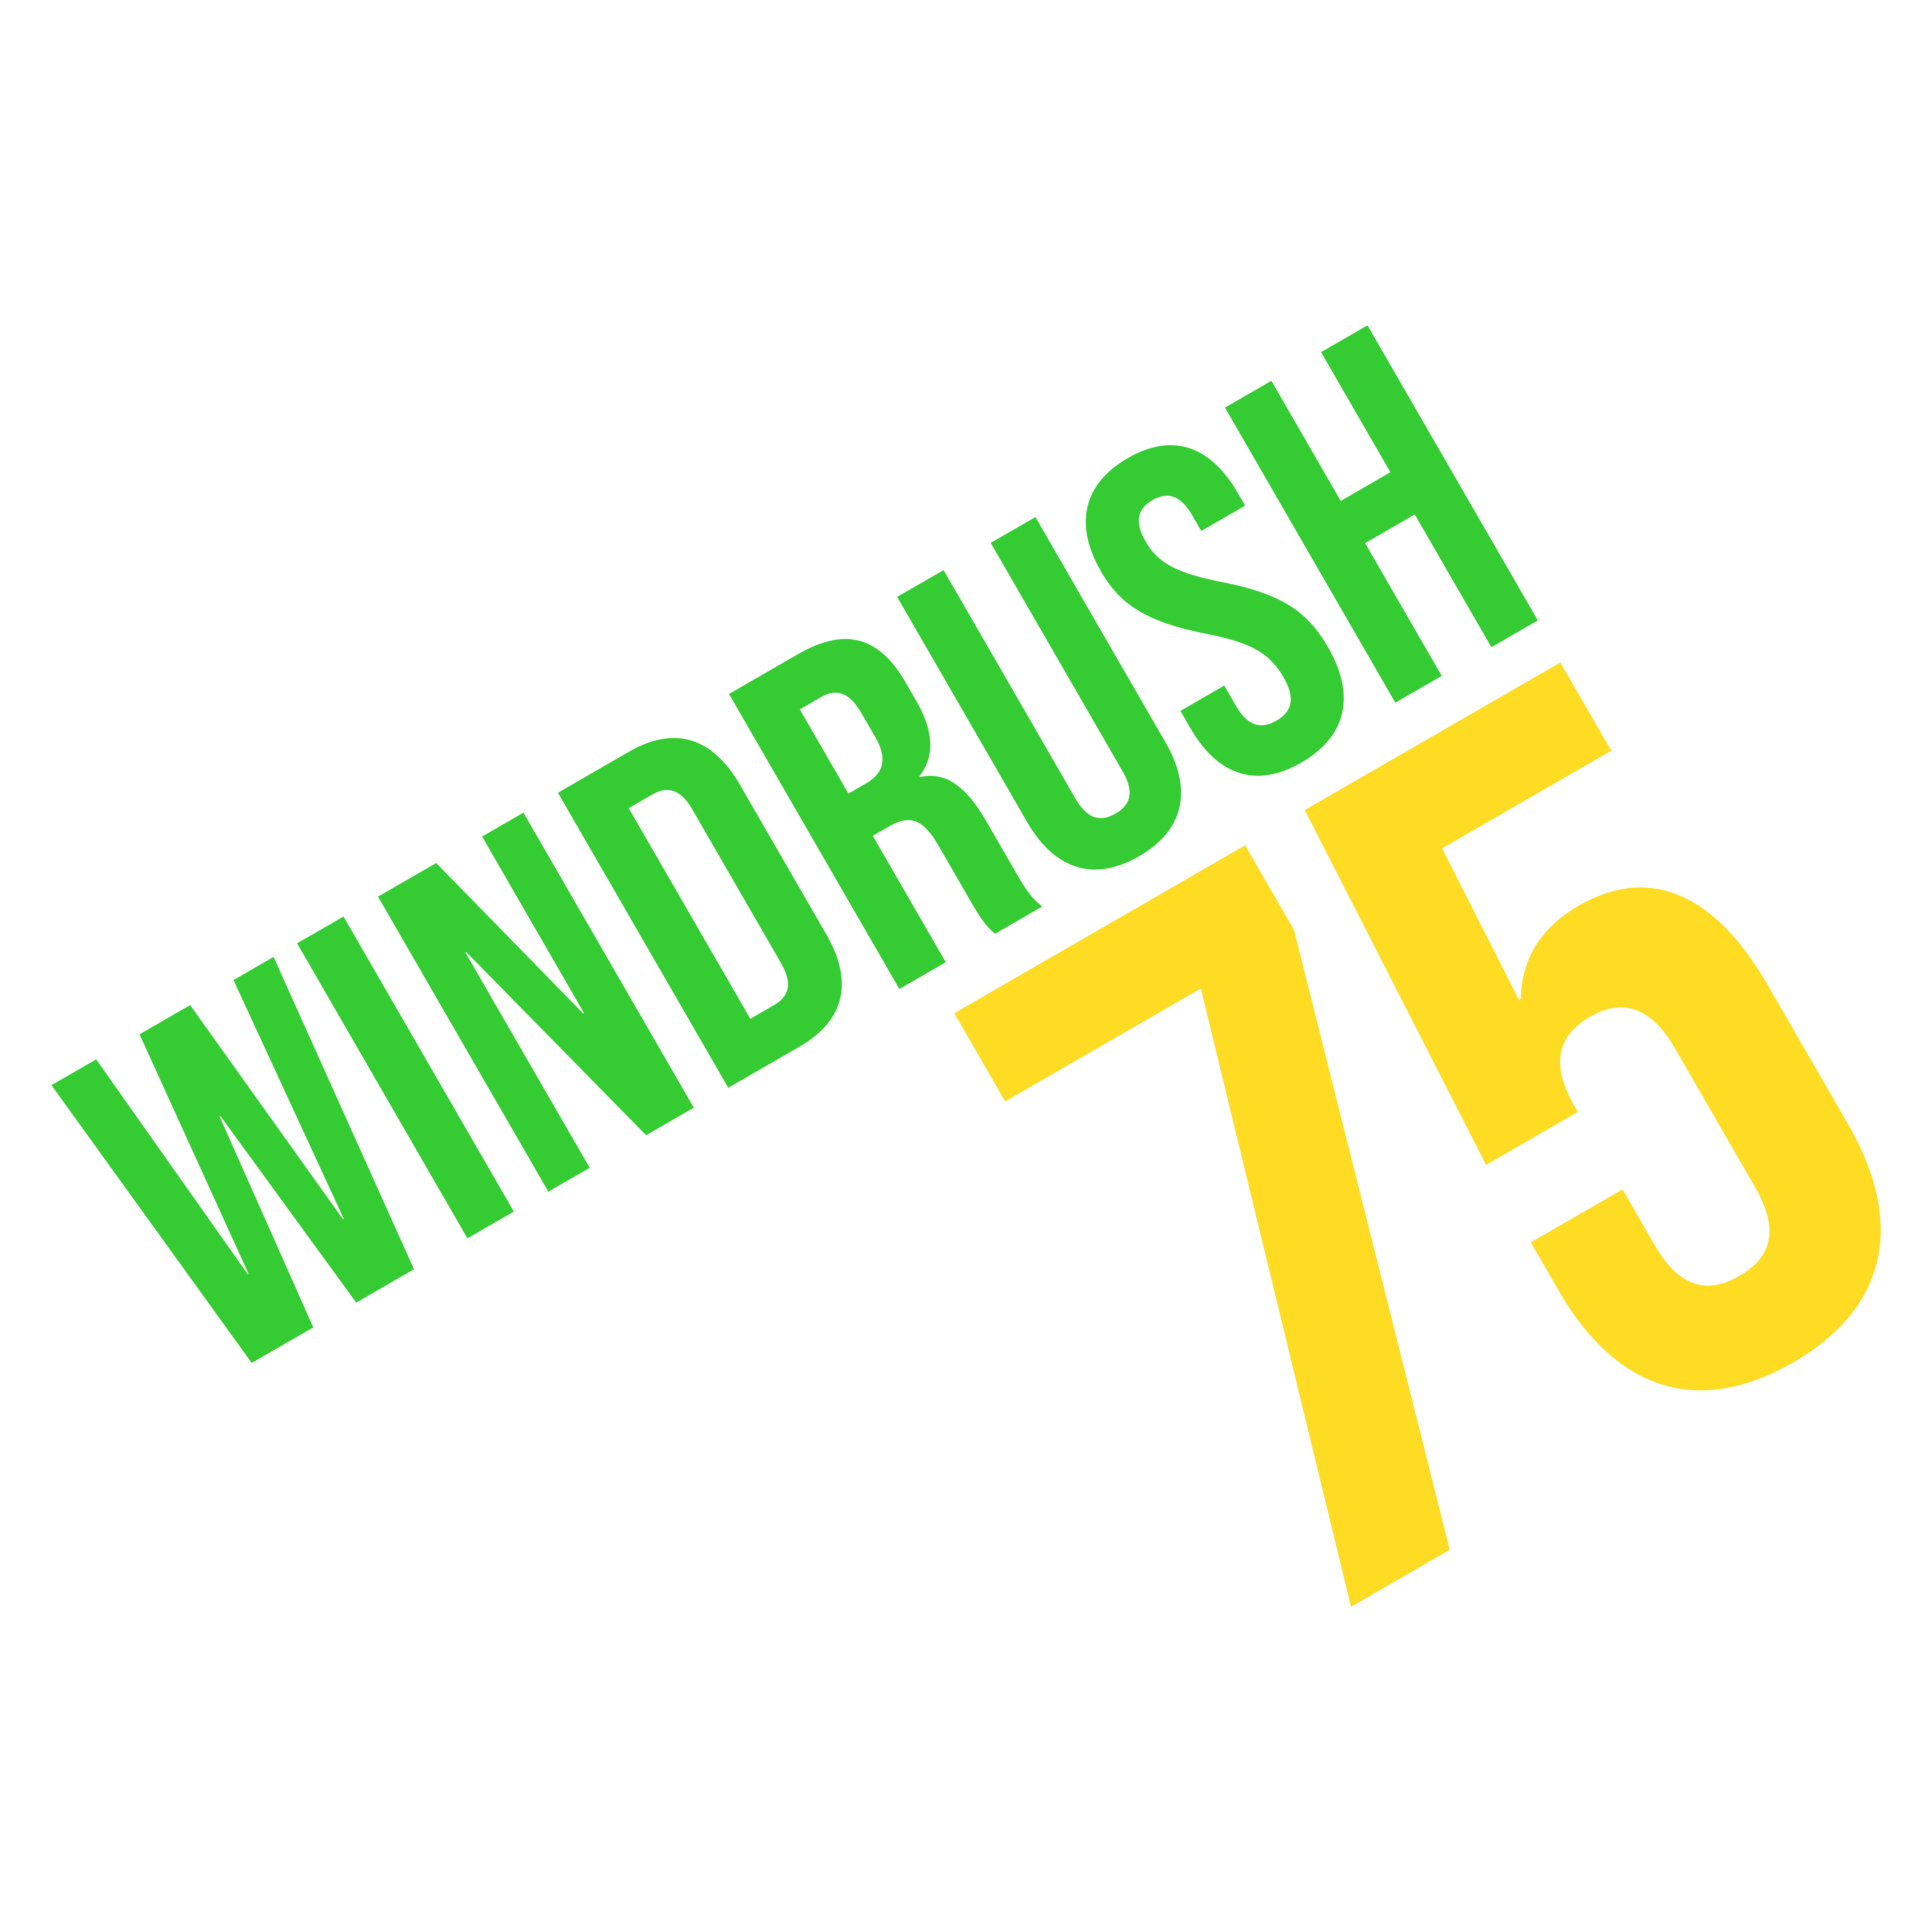 City celebrates Windrush anniversary with programme of events